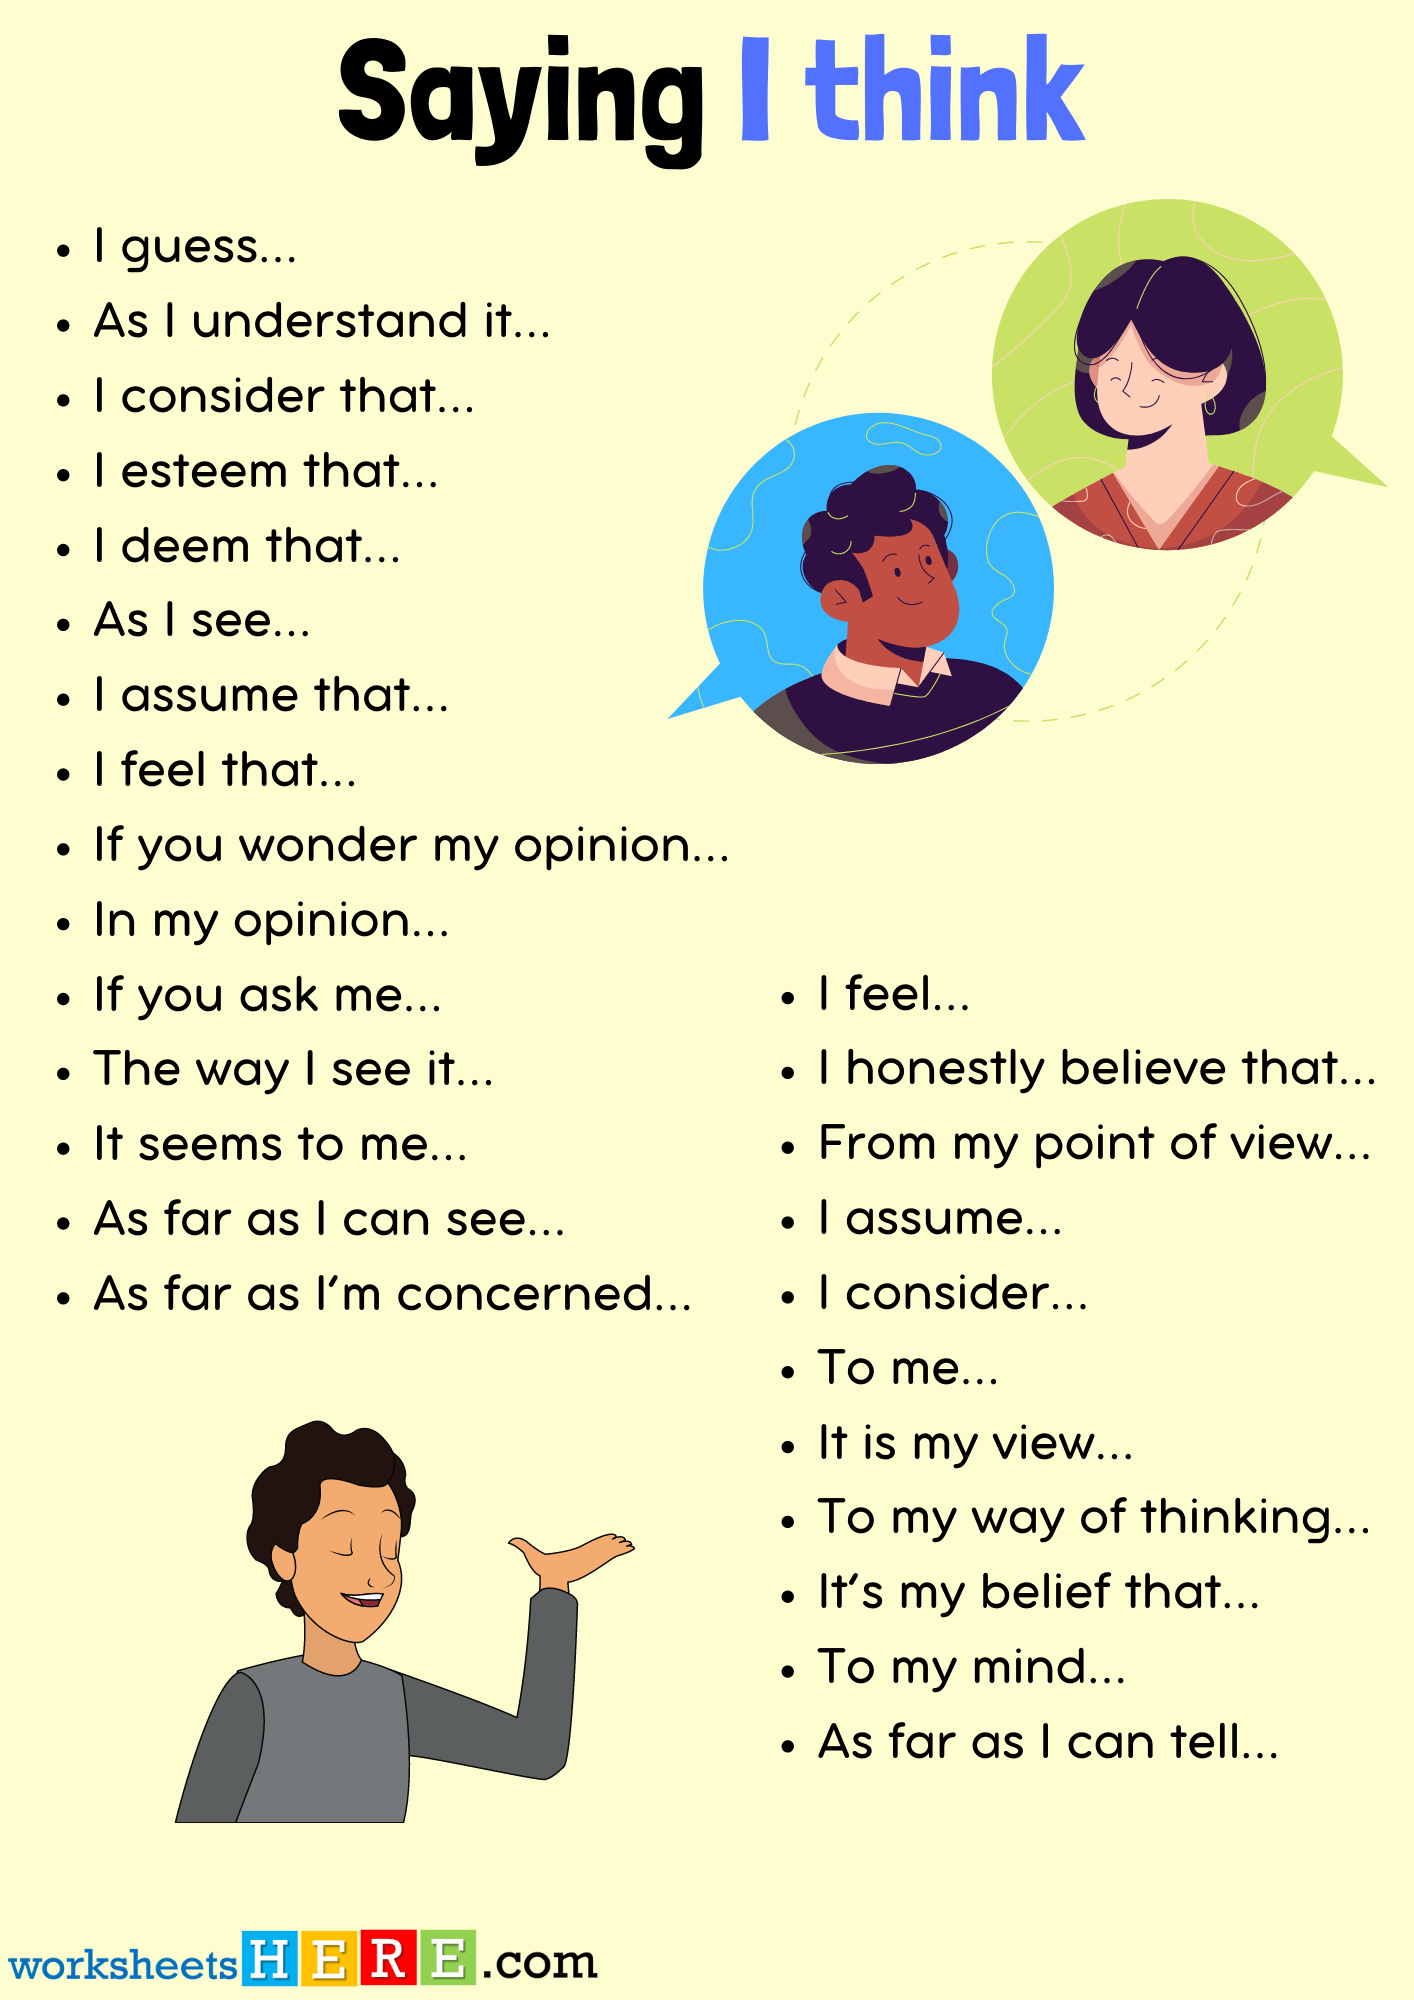 Different Ways To Saying I think in English, Speaking Worksheets